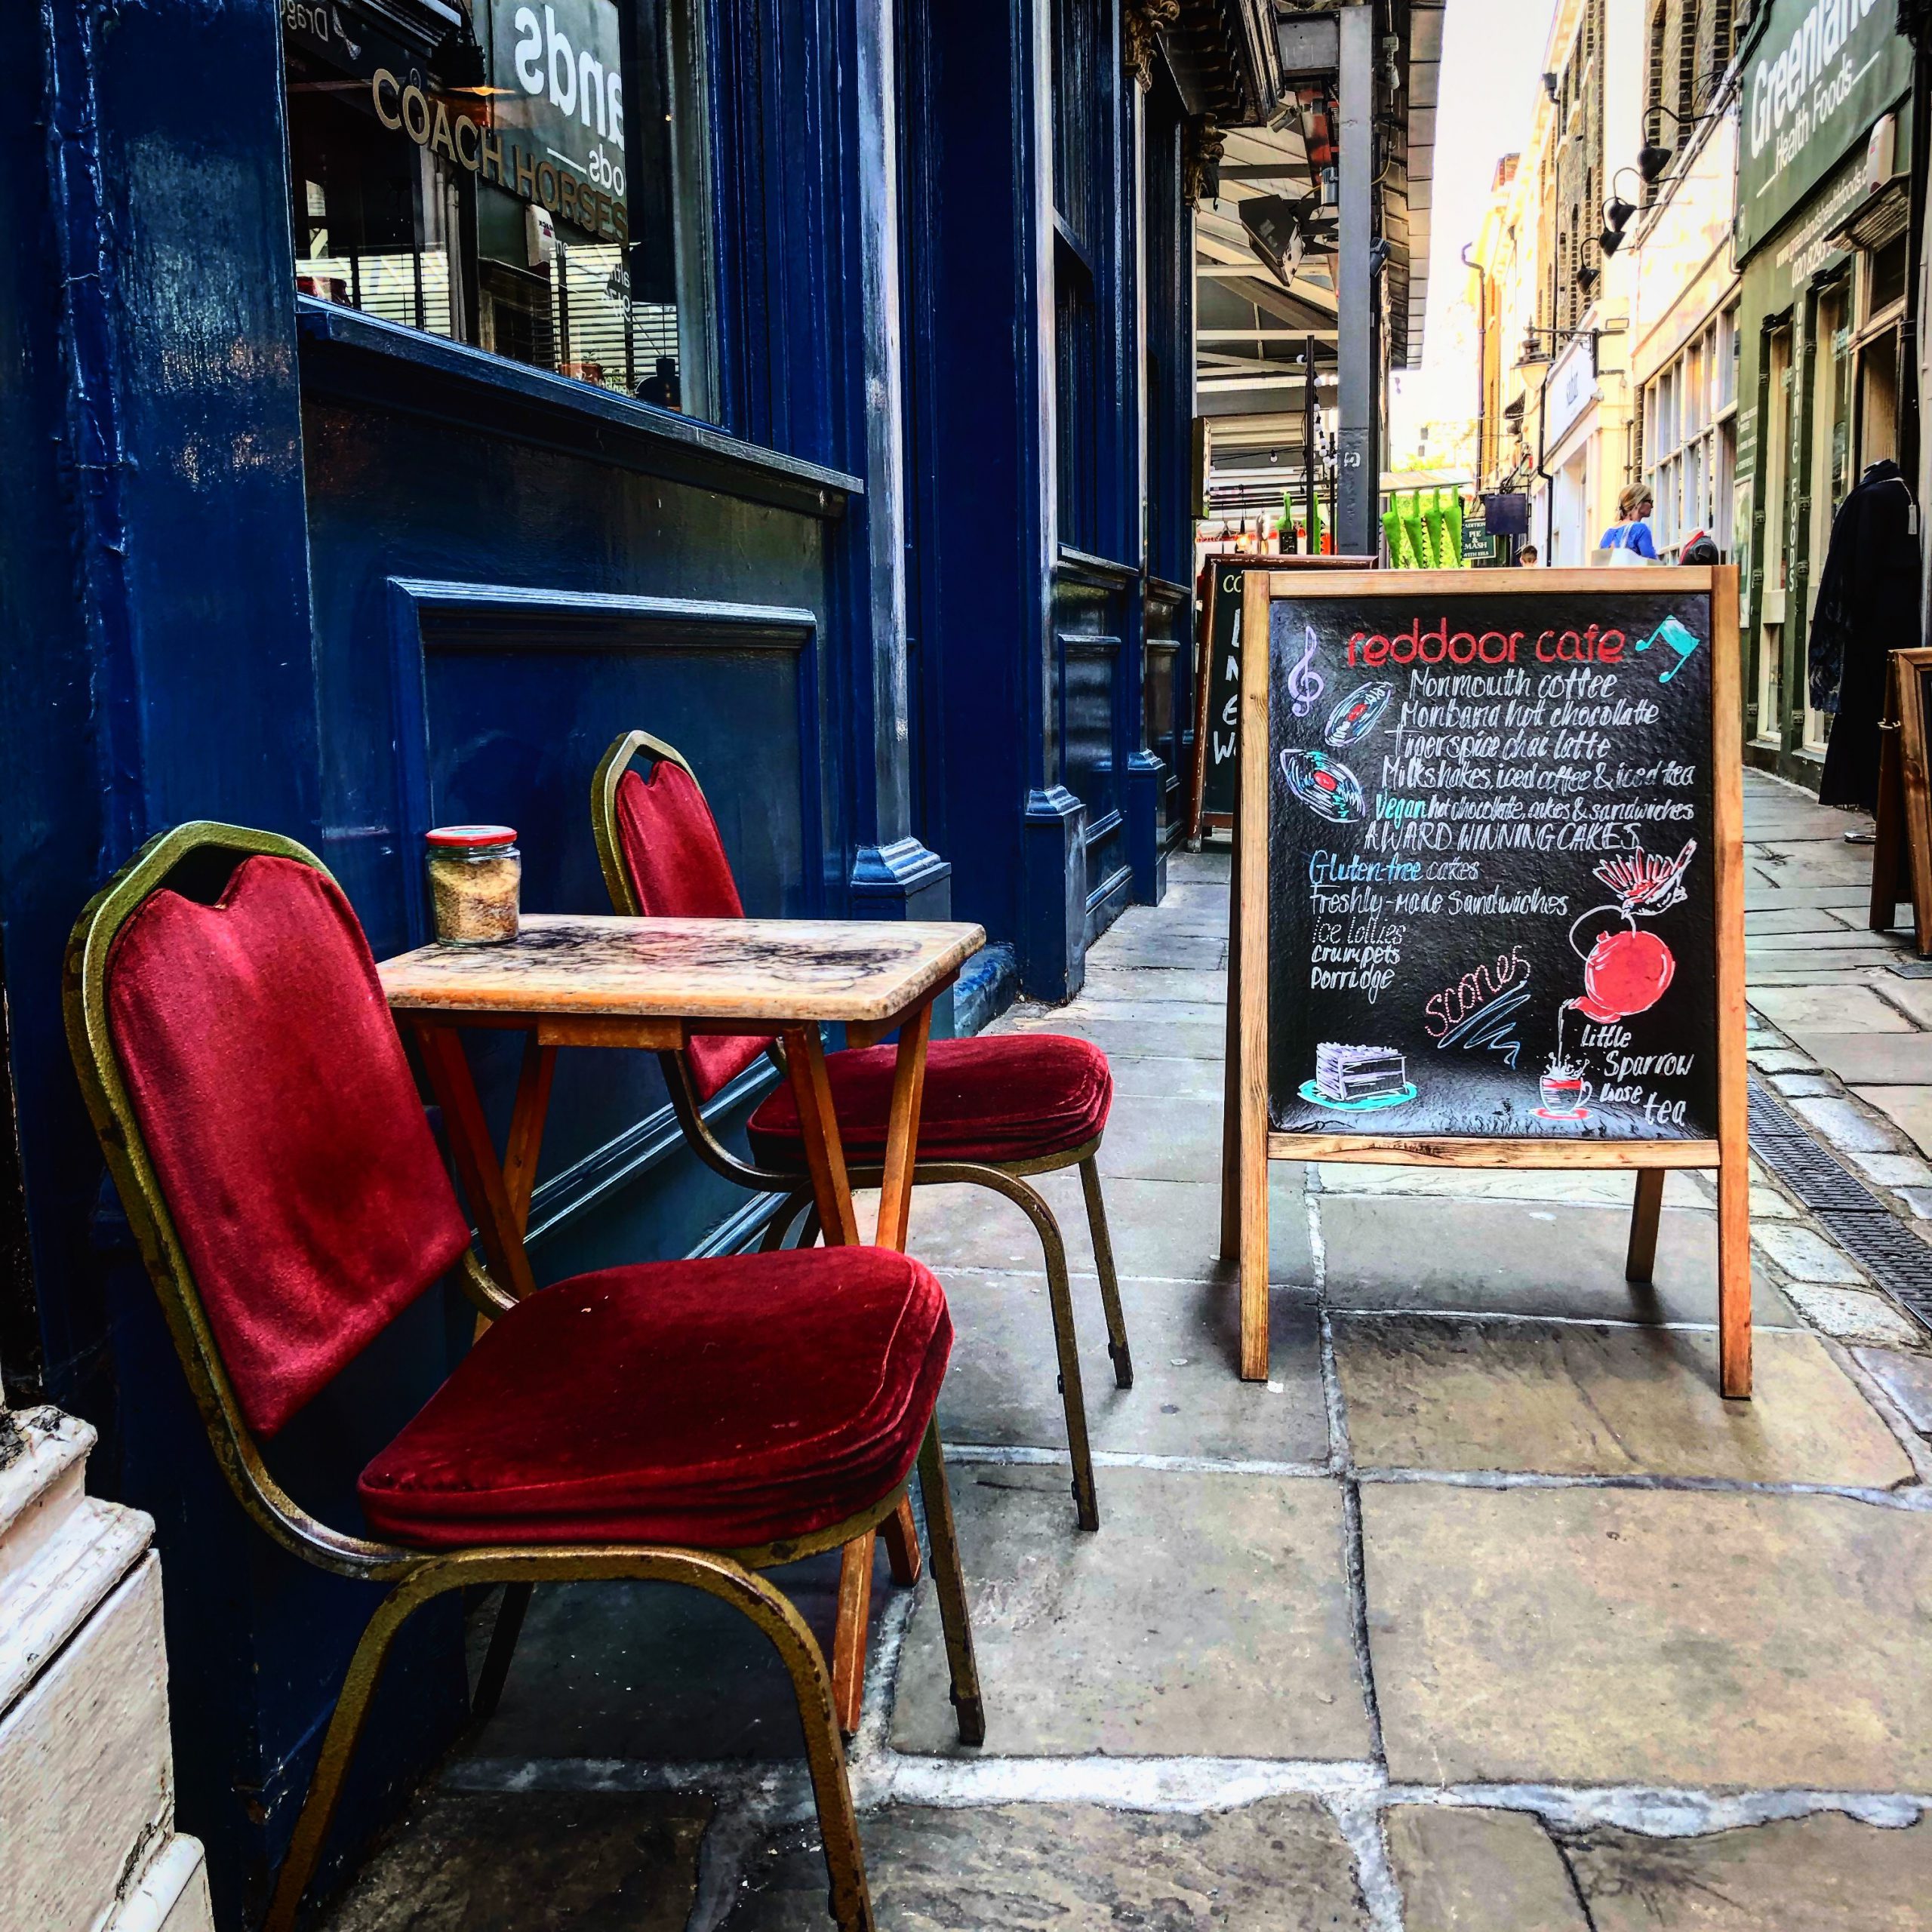 The narrow lane in front of "Reddoor Café" leads to Greenwich Market